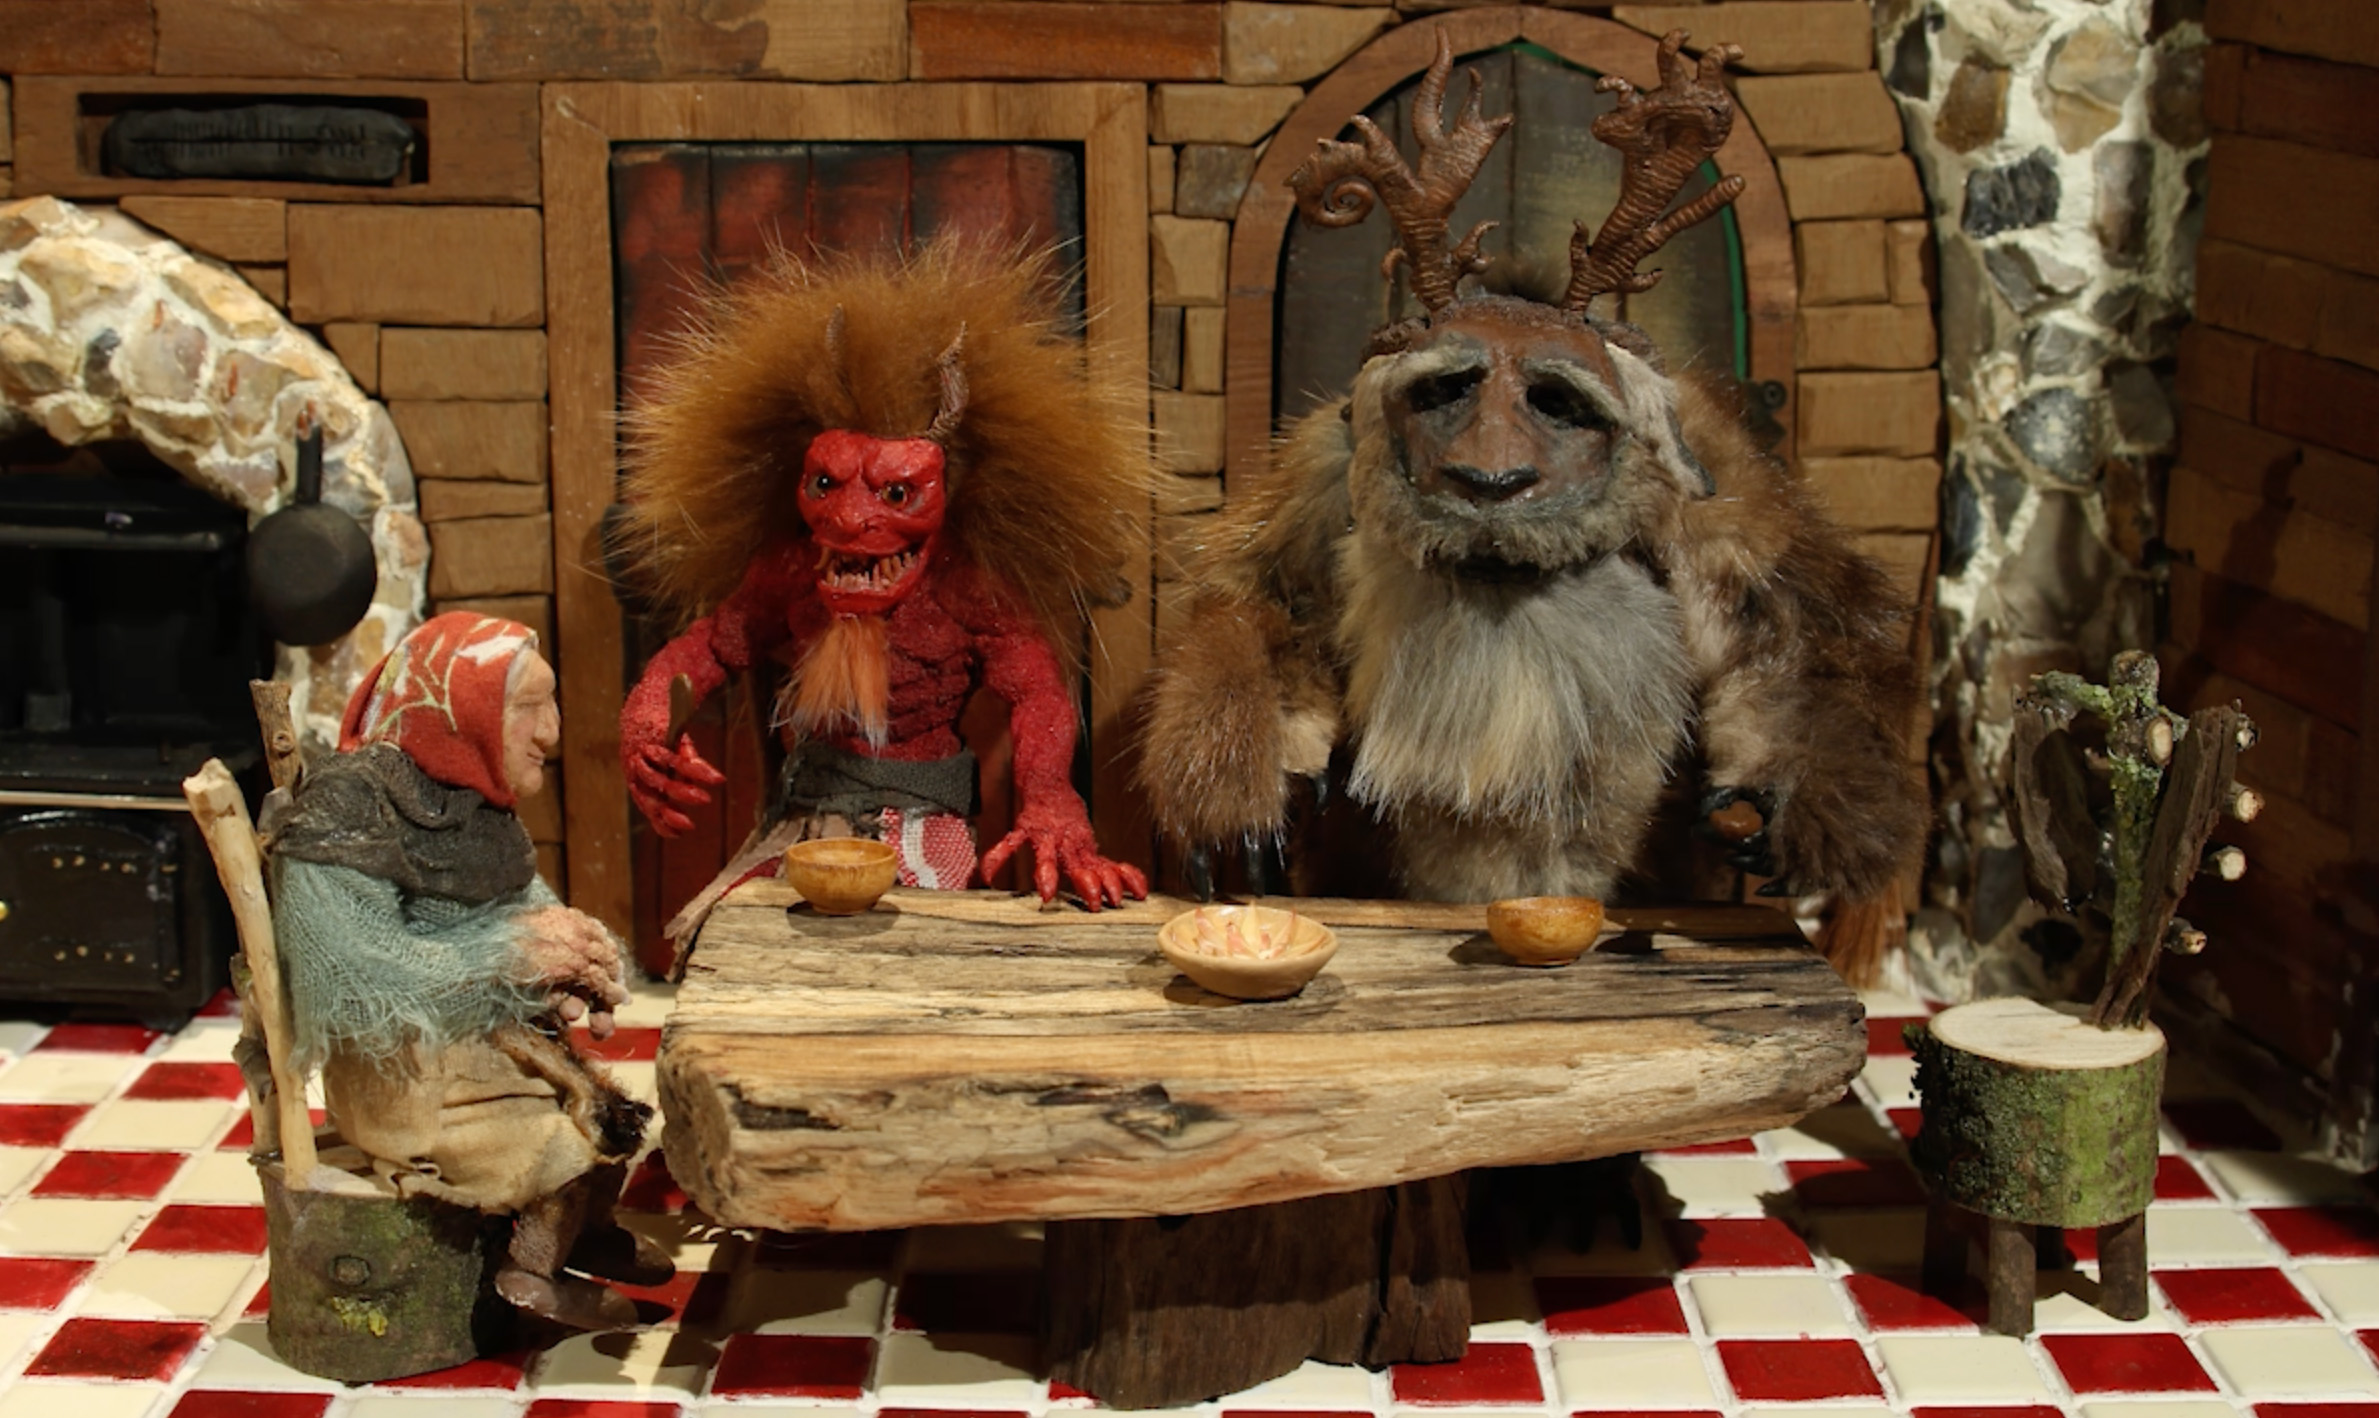 Scene from Stop Motion animation by Joseph Xotta, showing three puppets eating together at a table.